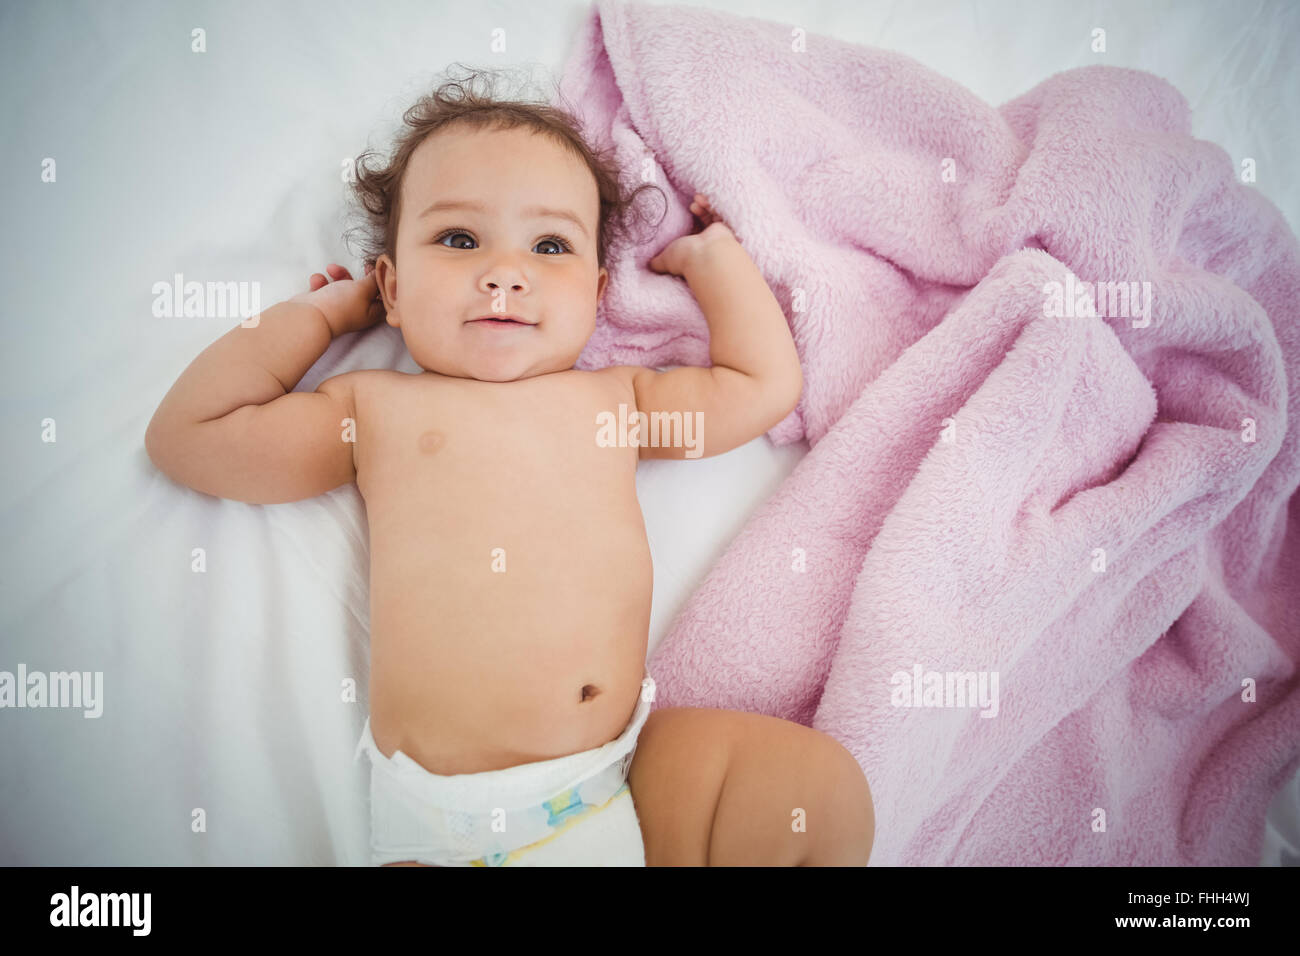 Cute baby girl on bed Banque D'Images